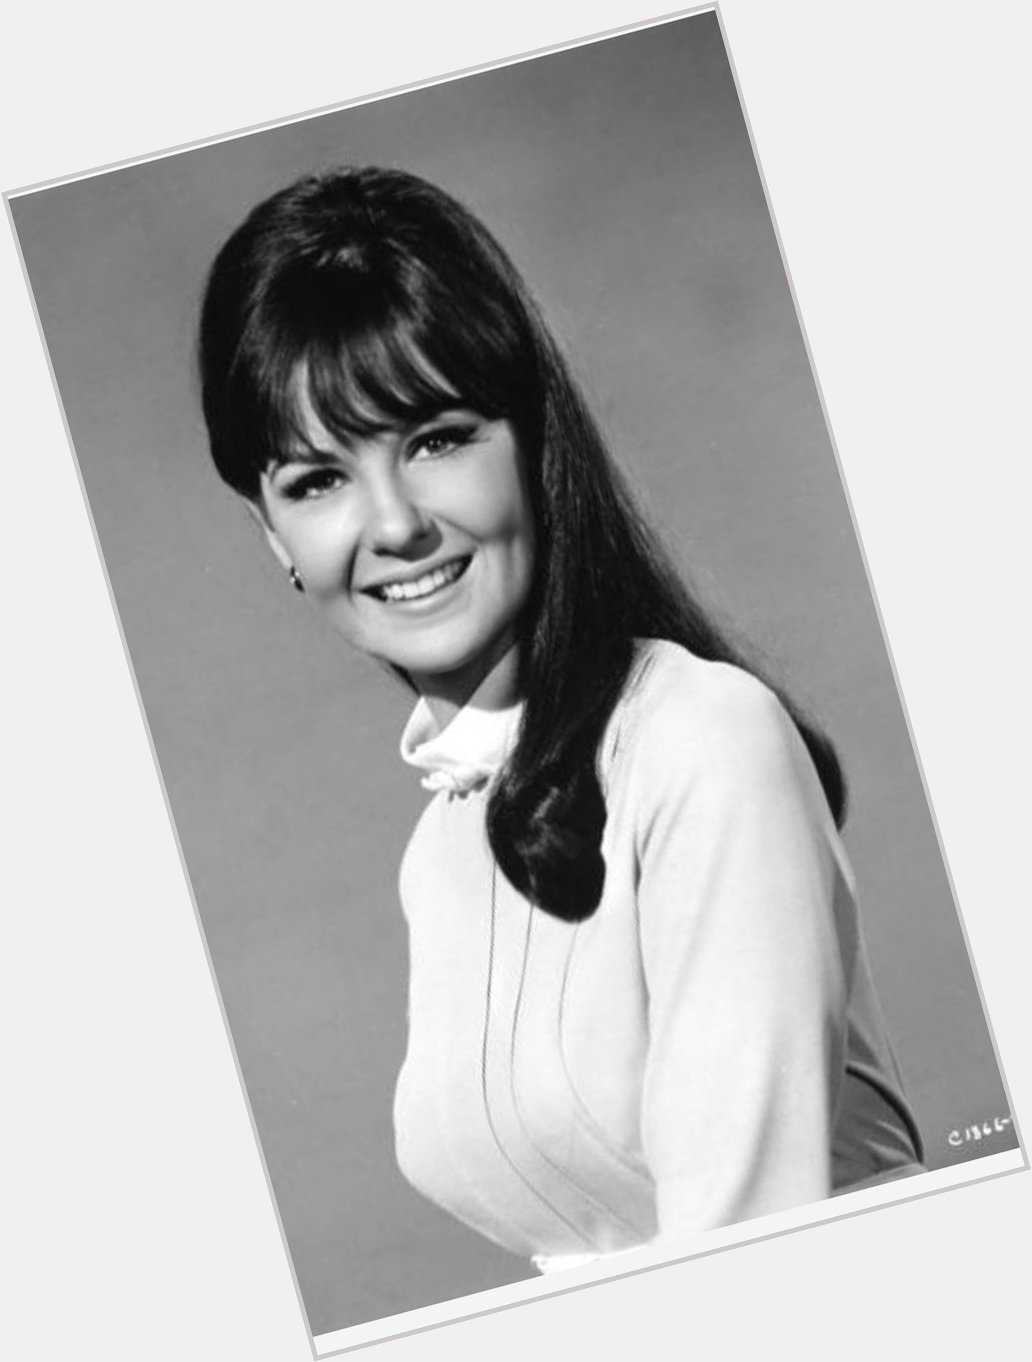 Happy 79th Birthday to Shelley Fabares 